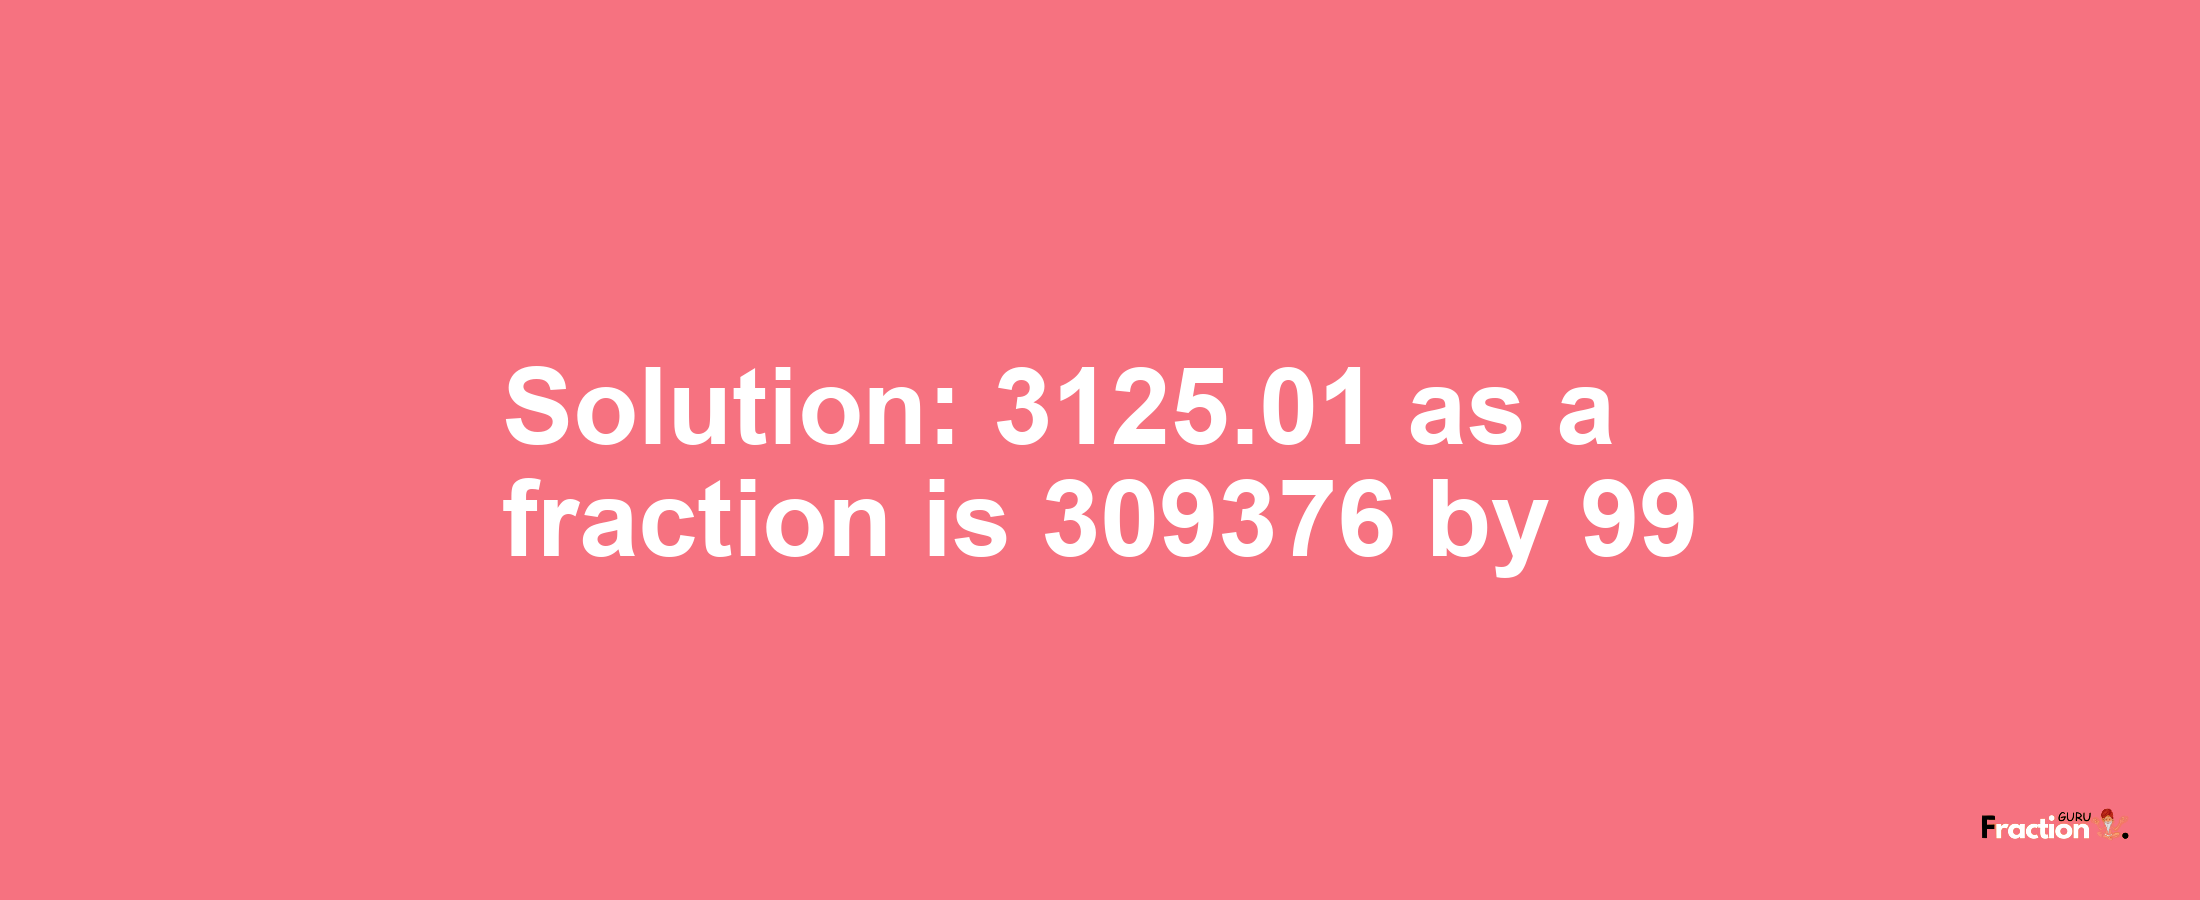 Solution:3125.01 as a fraction is 309376/99